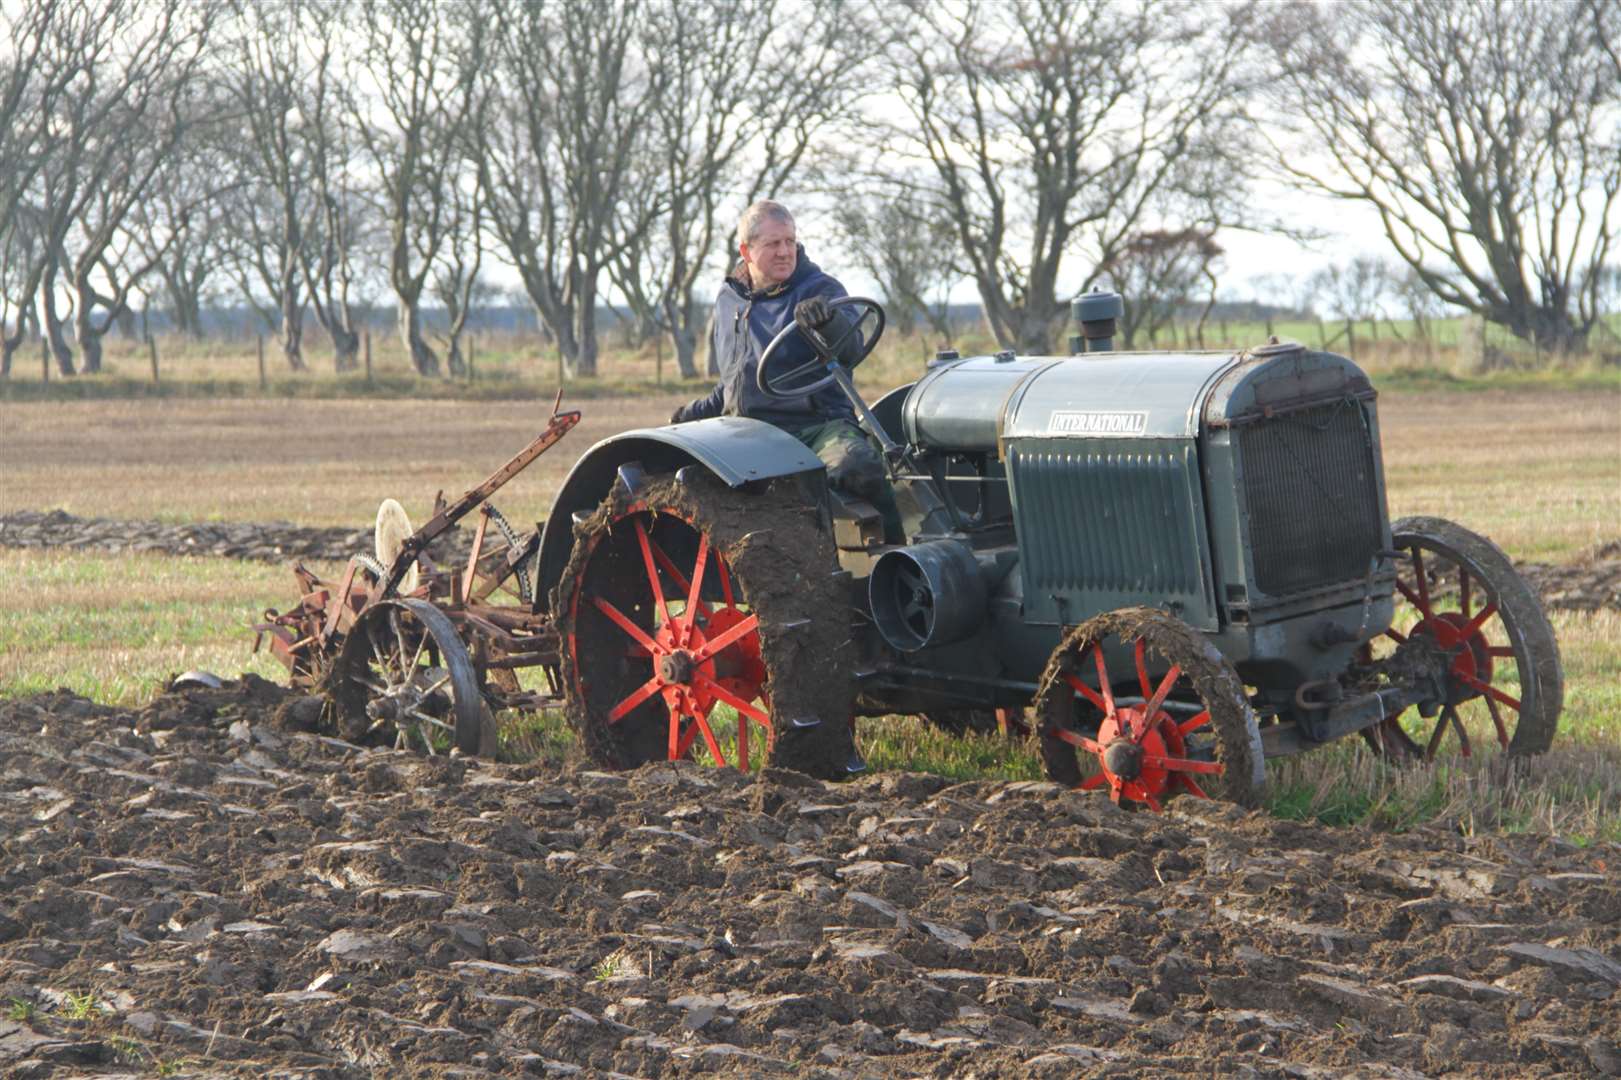 Michael Mackay, West Greenland, in action at the last Latheron Parish Ploughing Association match held at Banks Lodge, Watten, in November 2019. Picture: Willie Mackay